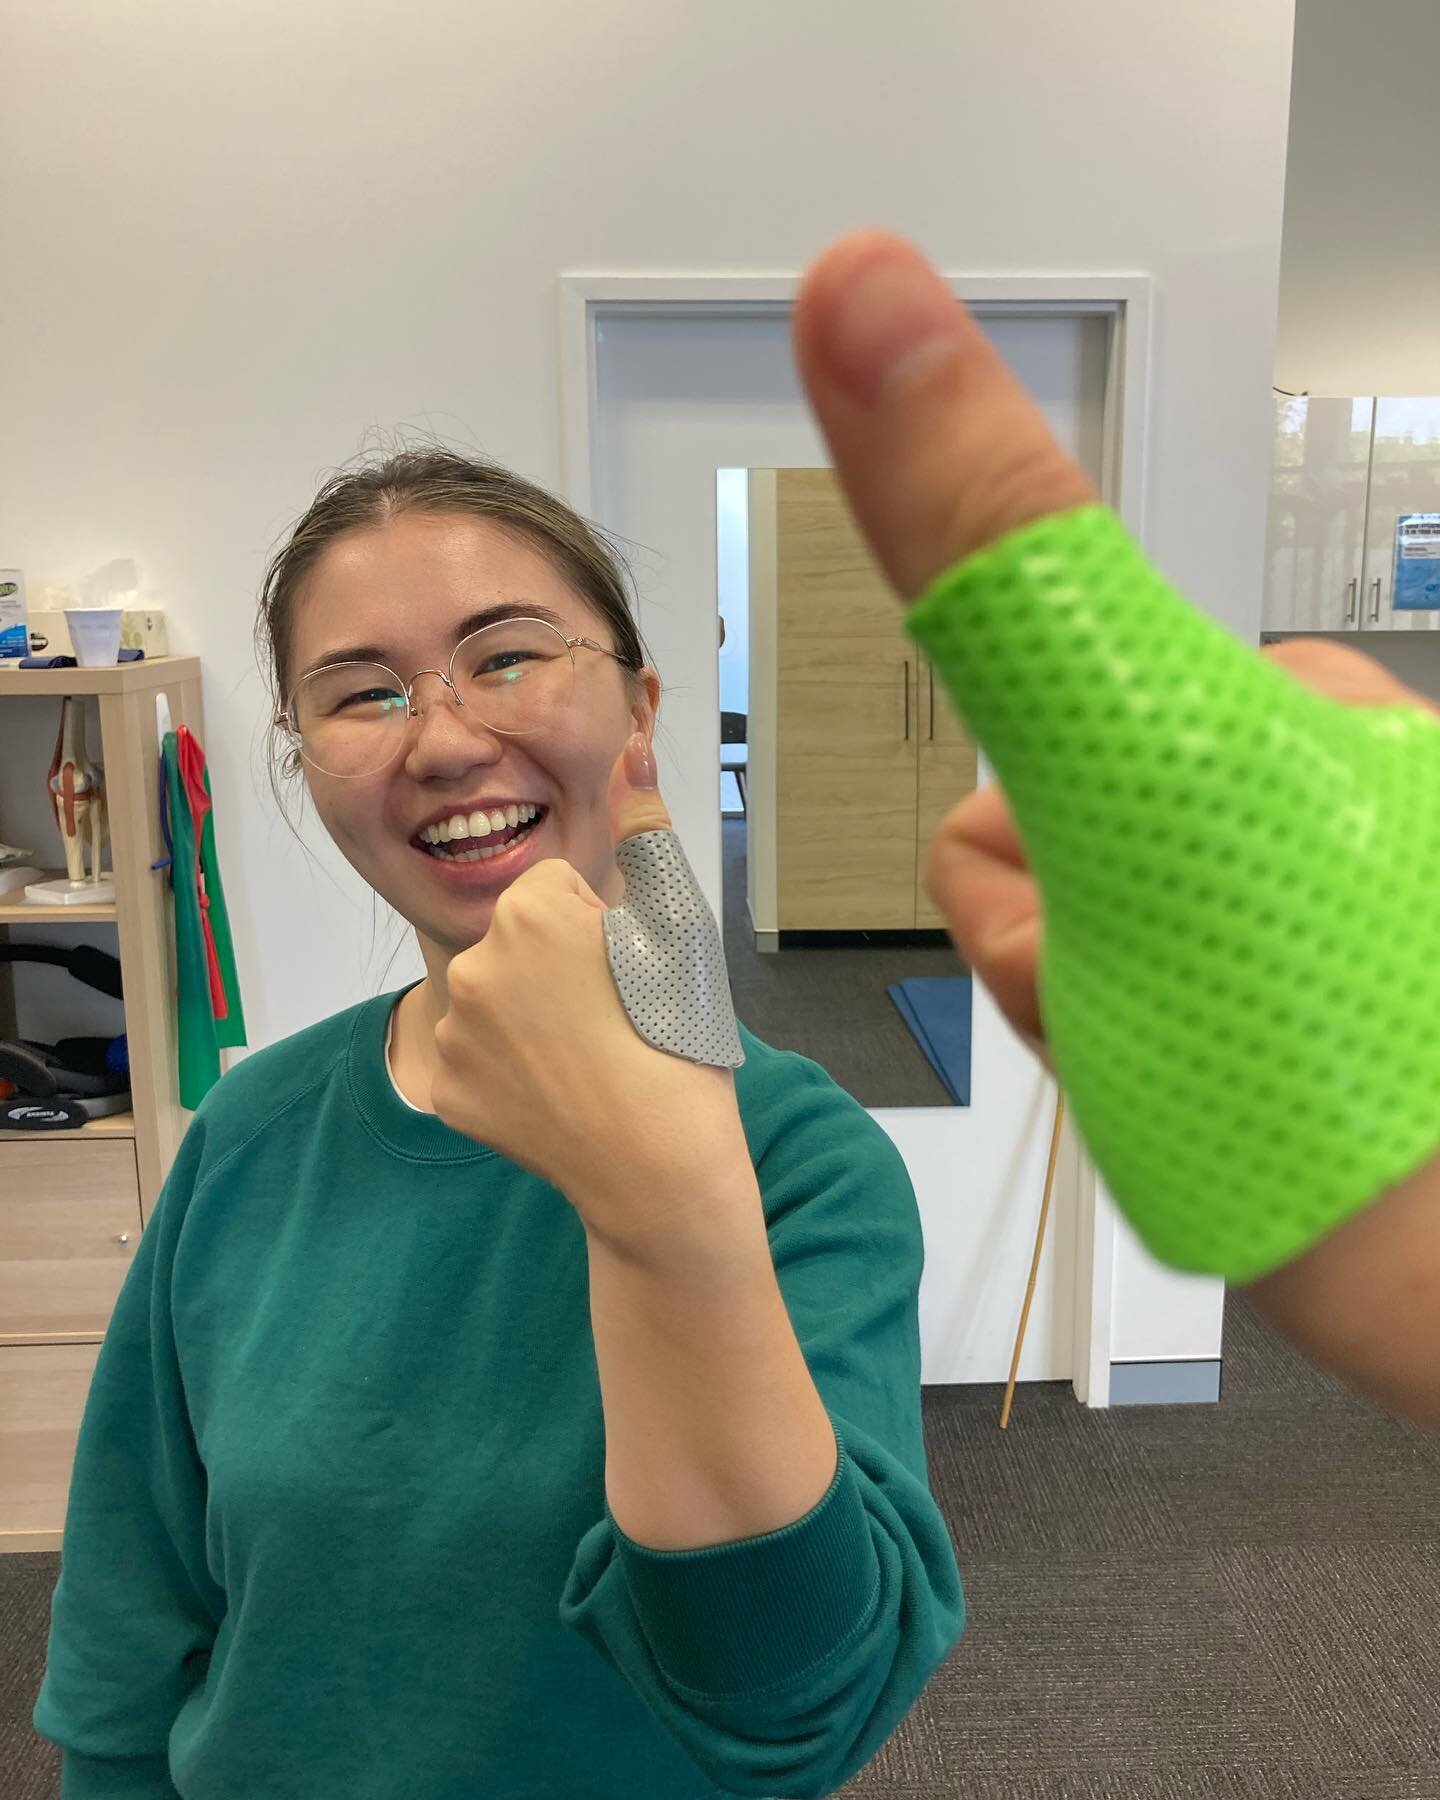 𝐂𝐨𝐨𝐤𝐢𝐧𝐠 𝐢𝐧 𝐊𝐢𝐧𝐢𝐦𝐚!
Mark is not much of a chef but was able to mold this thumb splint! Splinting is used if joint stability is needed for the clients recovery. Feel free to reach out if you have a hand or wrist injury that needs looking